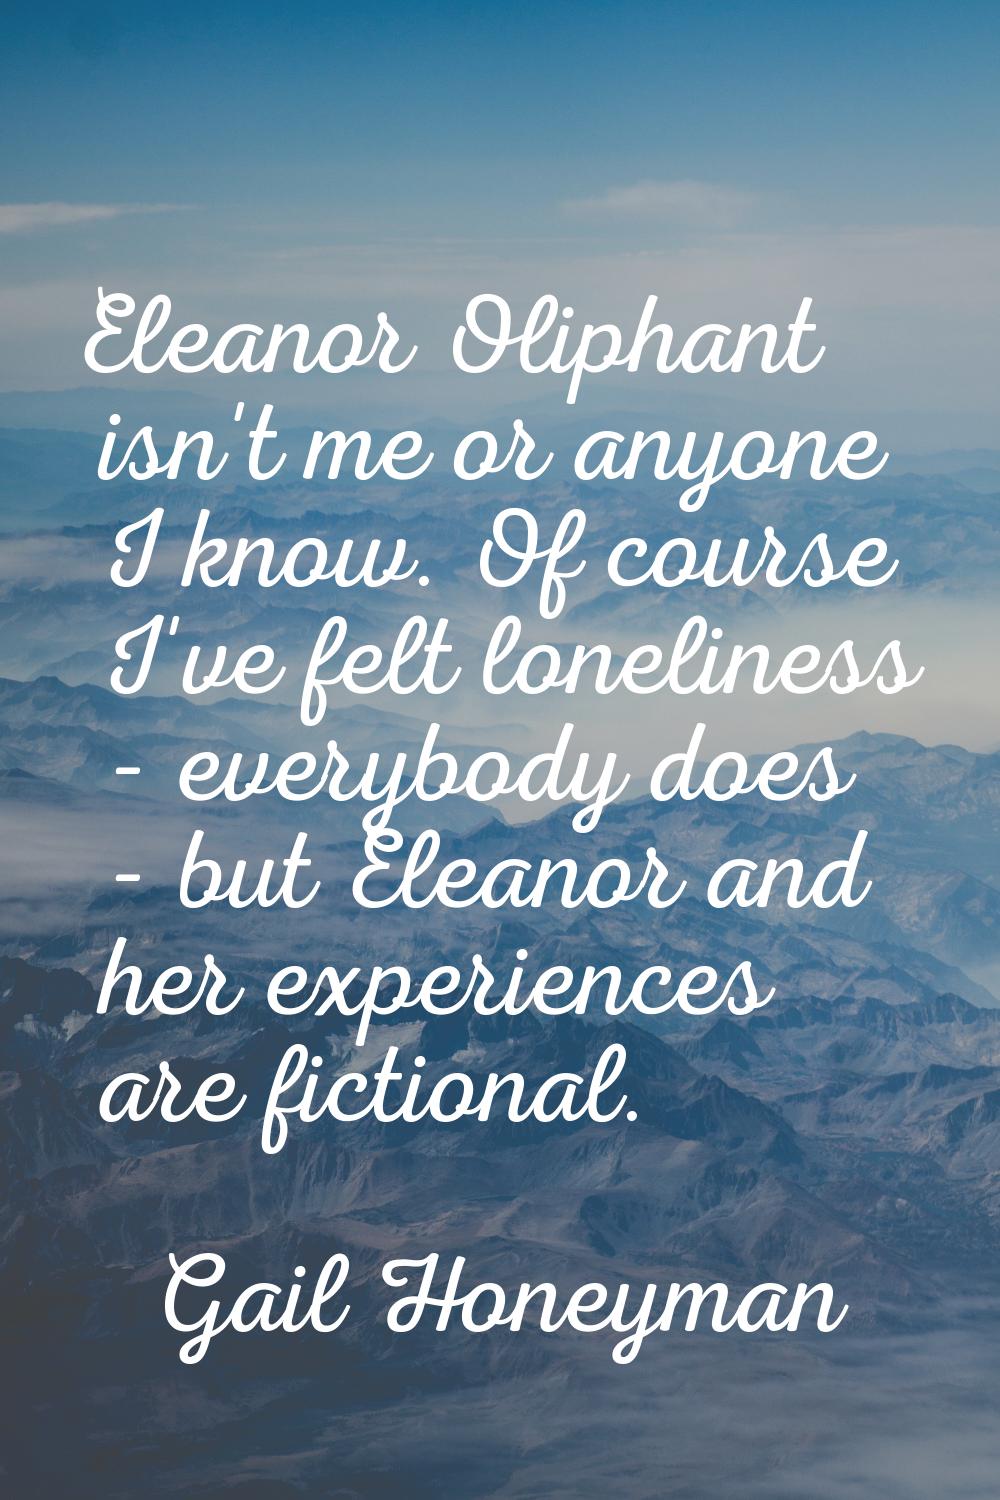 Eleanor Oliphant isn't me or anyone I know. Of course I've felt loneliness - everybody does - but E